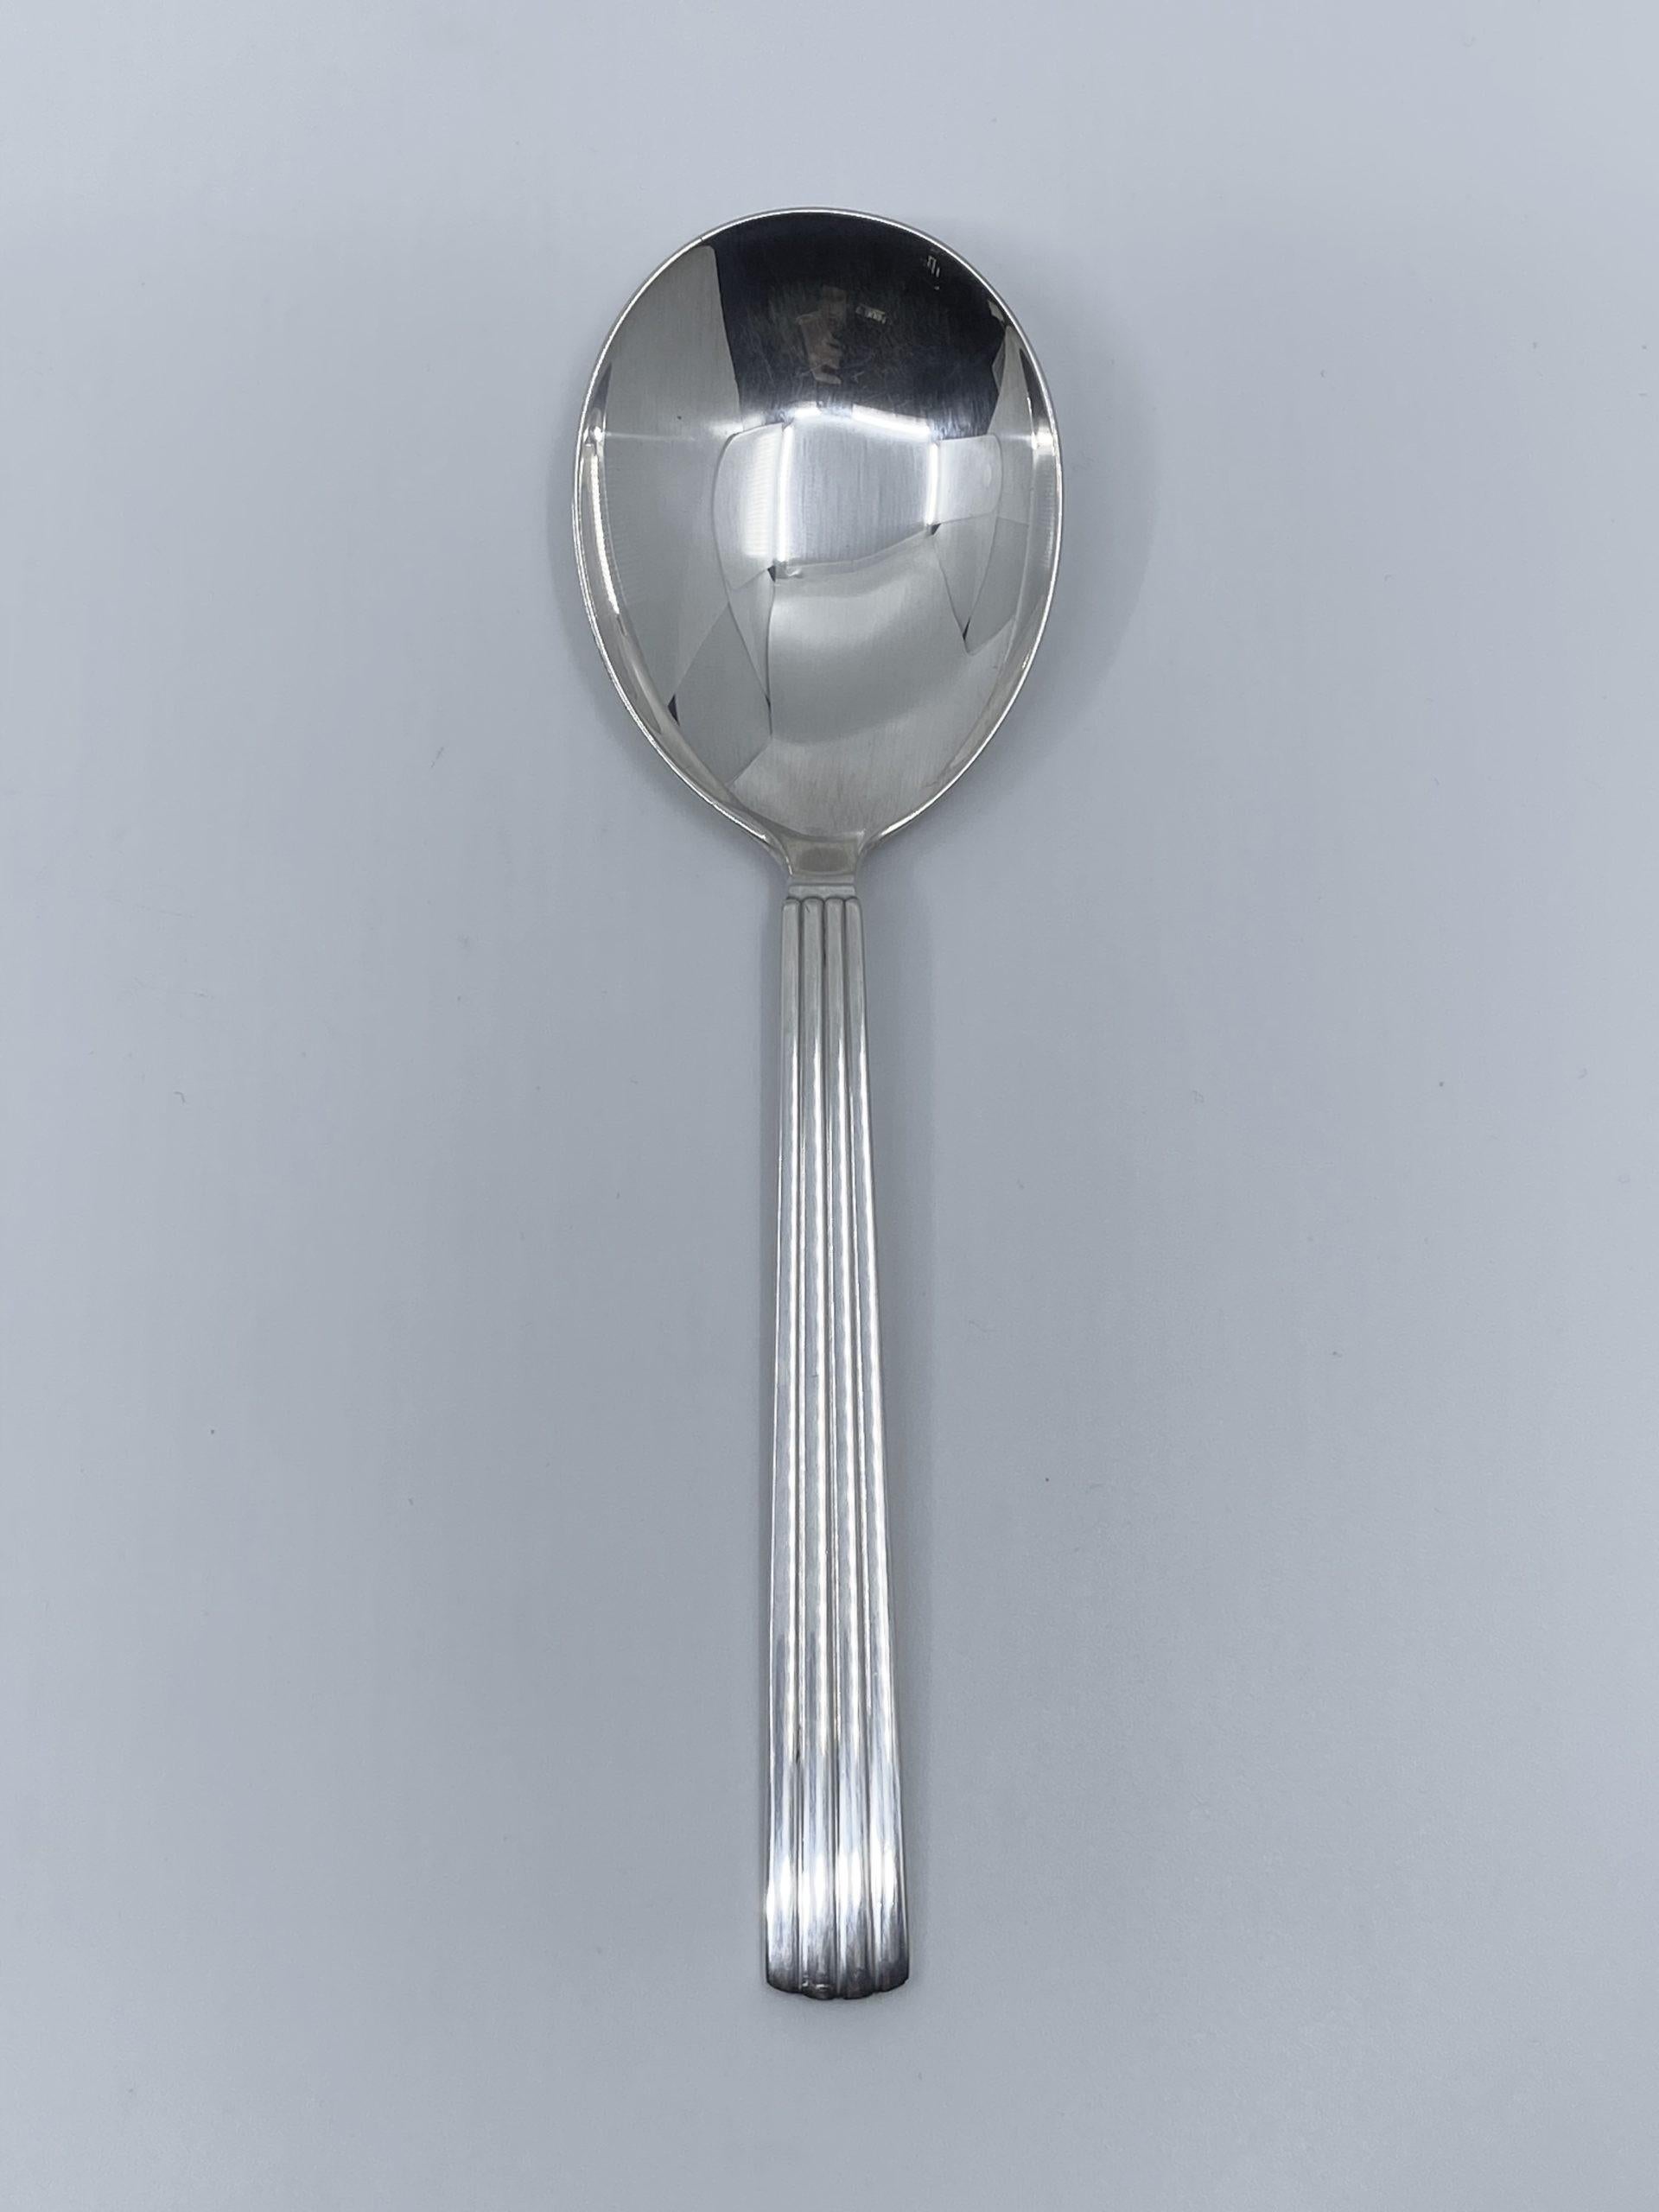 Sterling silver Georg Jensen serving spoon, item 115 in the Bernadotte pattern, design #9 by Sigvard Bernadotte from 1939.

Additional information:
Material: Sterling silver
Style: Art Deco
Hallmarks: With Georg Jensen hallmark, made in